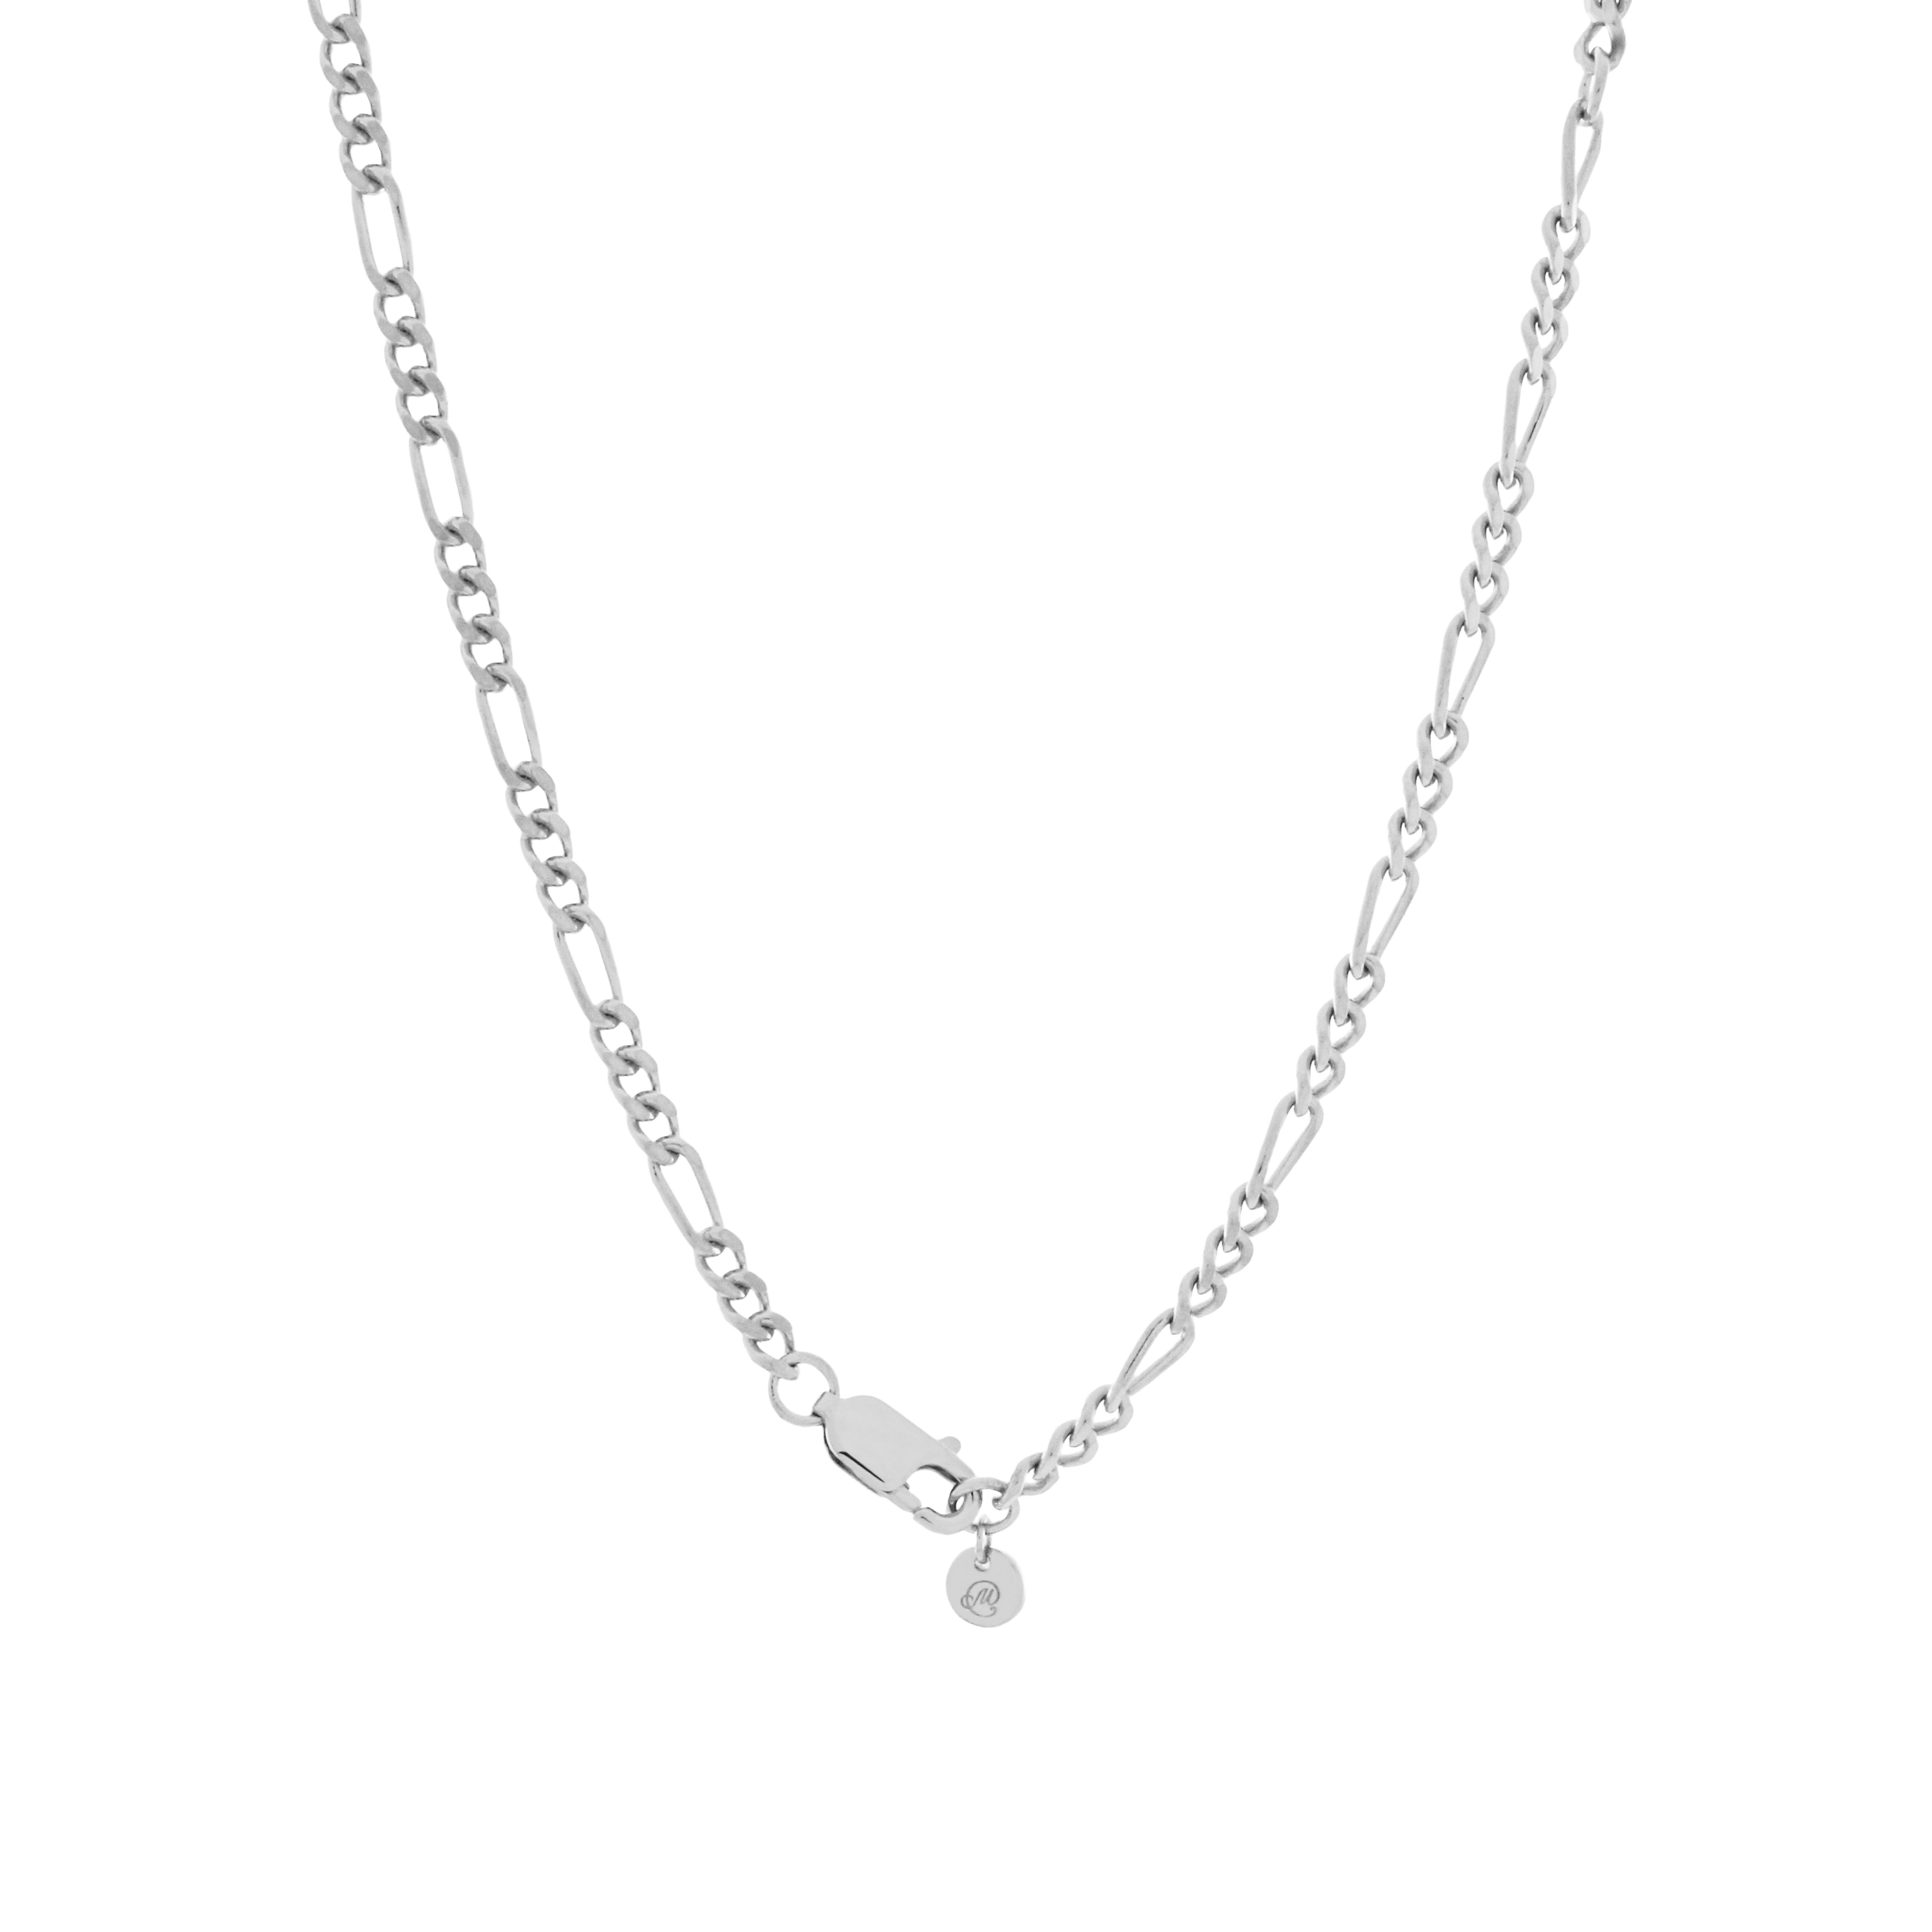 Seville Chain Necklace. Silver